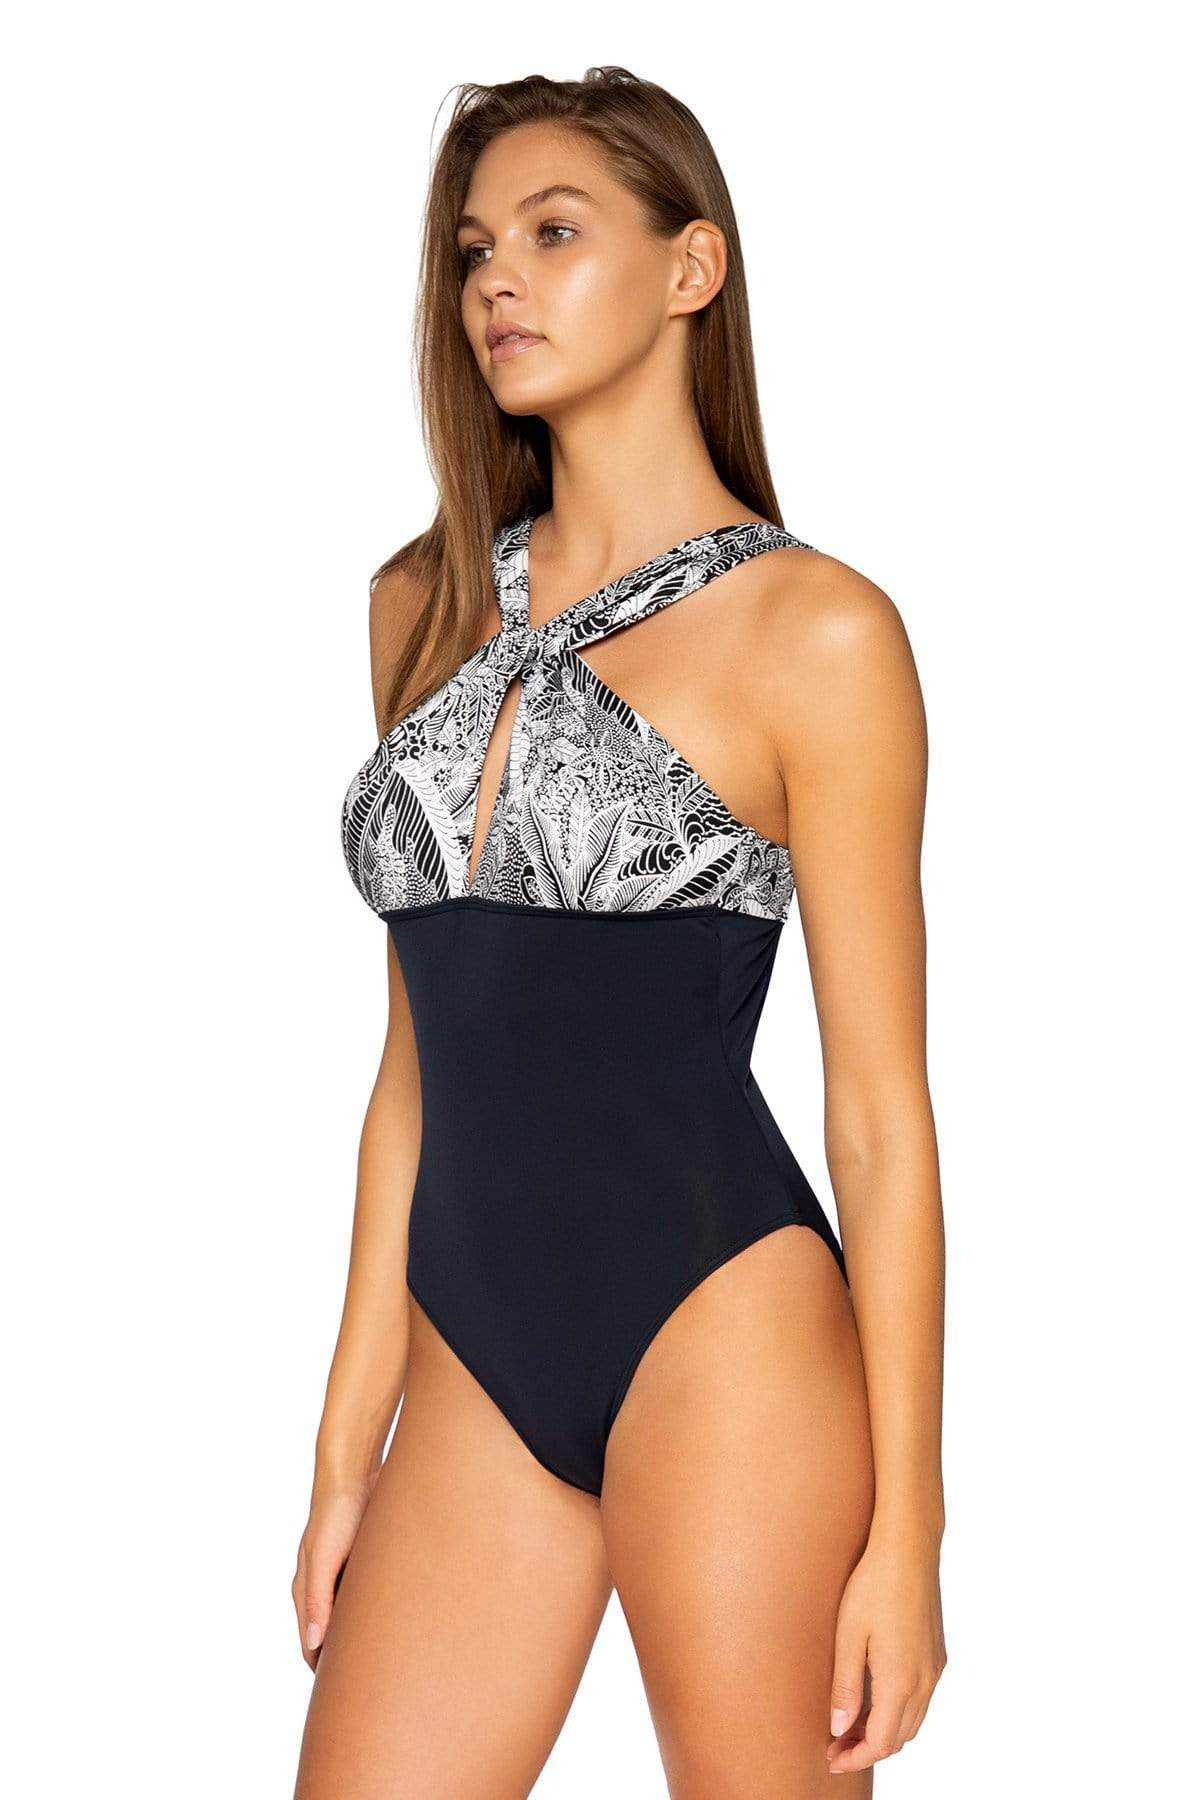 Bestswimwear -  Sunsets South Pacific  Grace One Piece